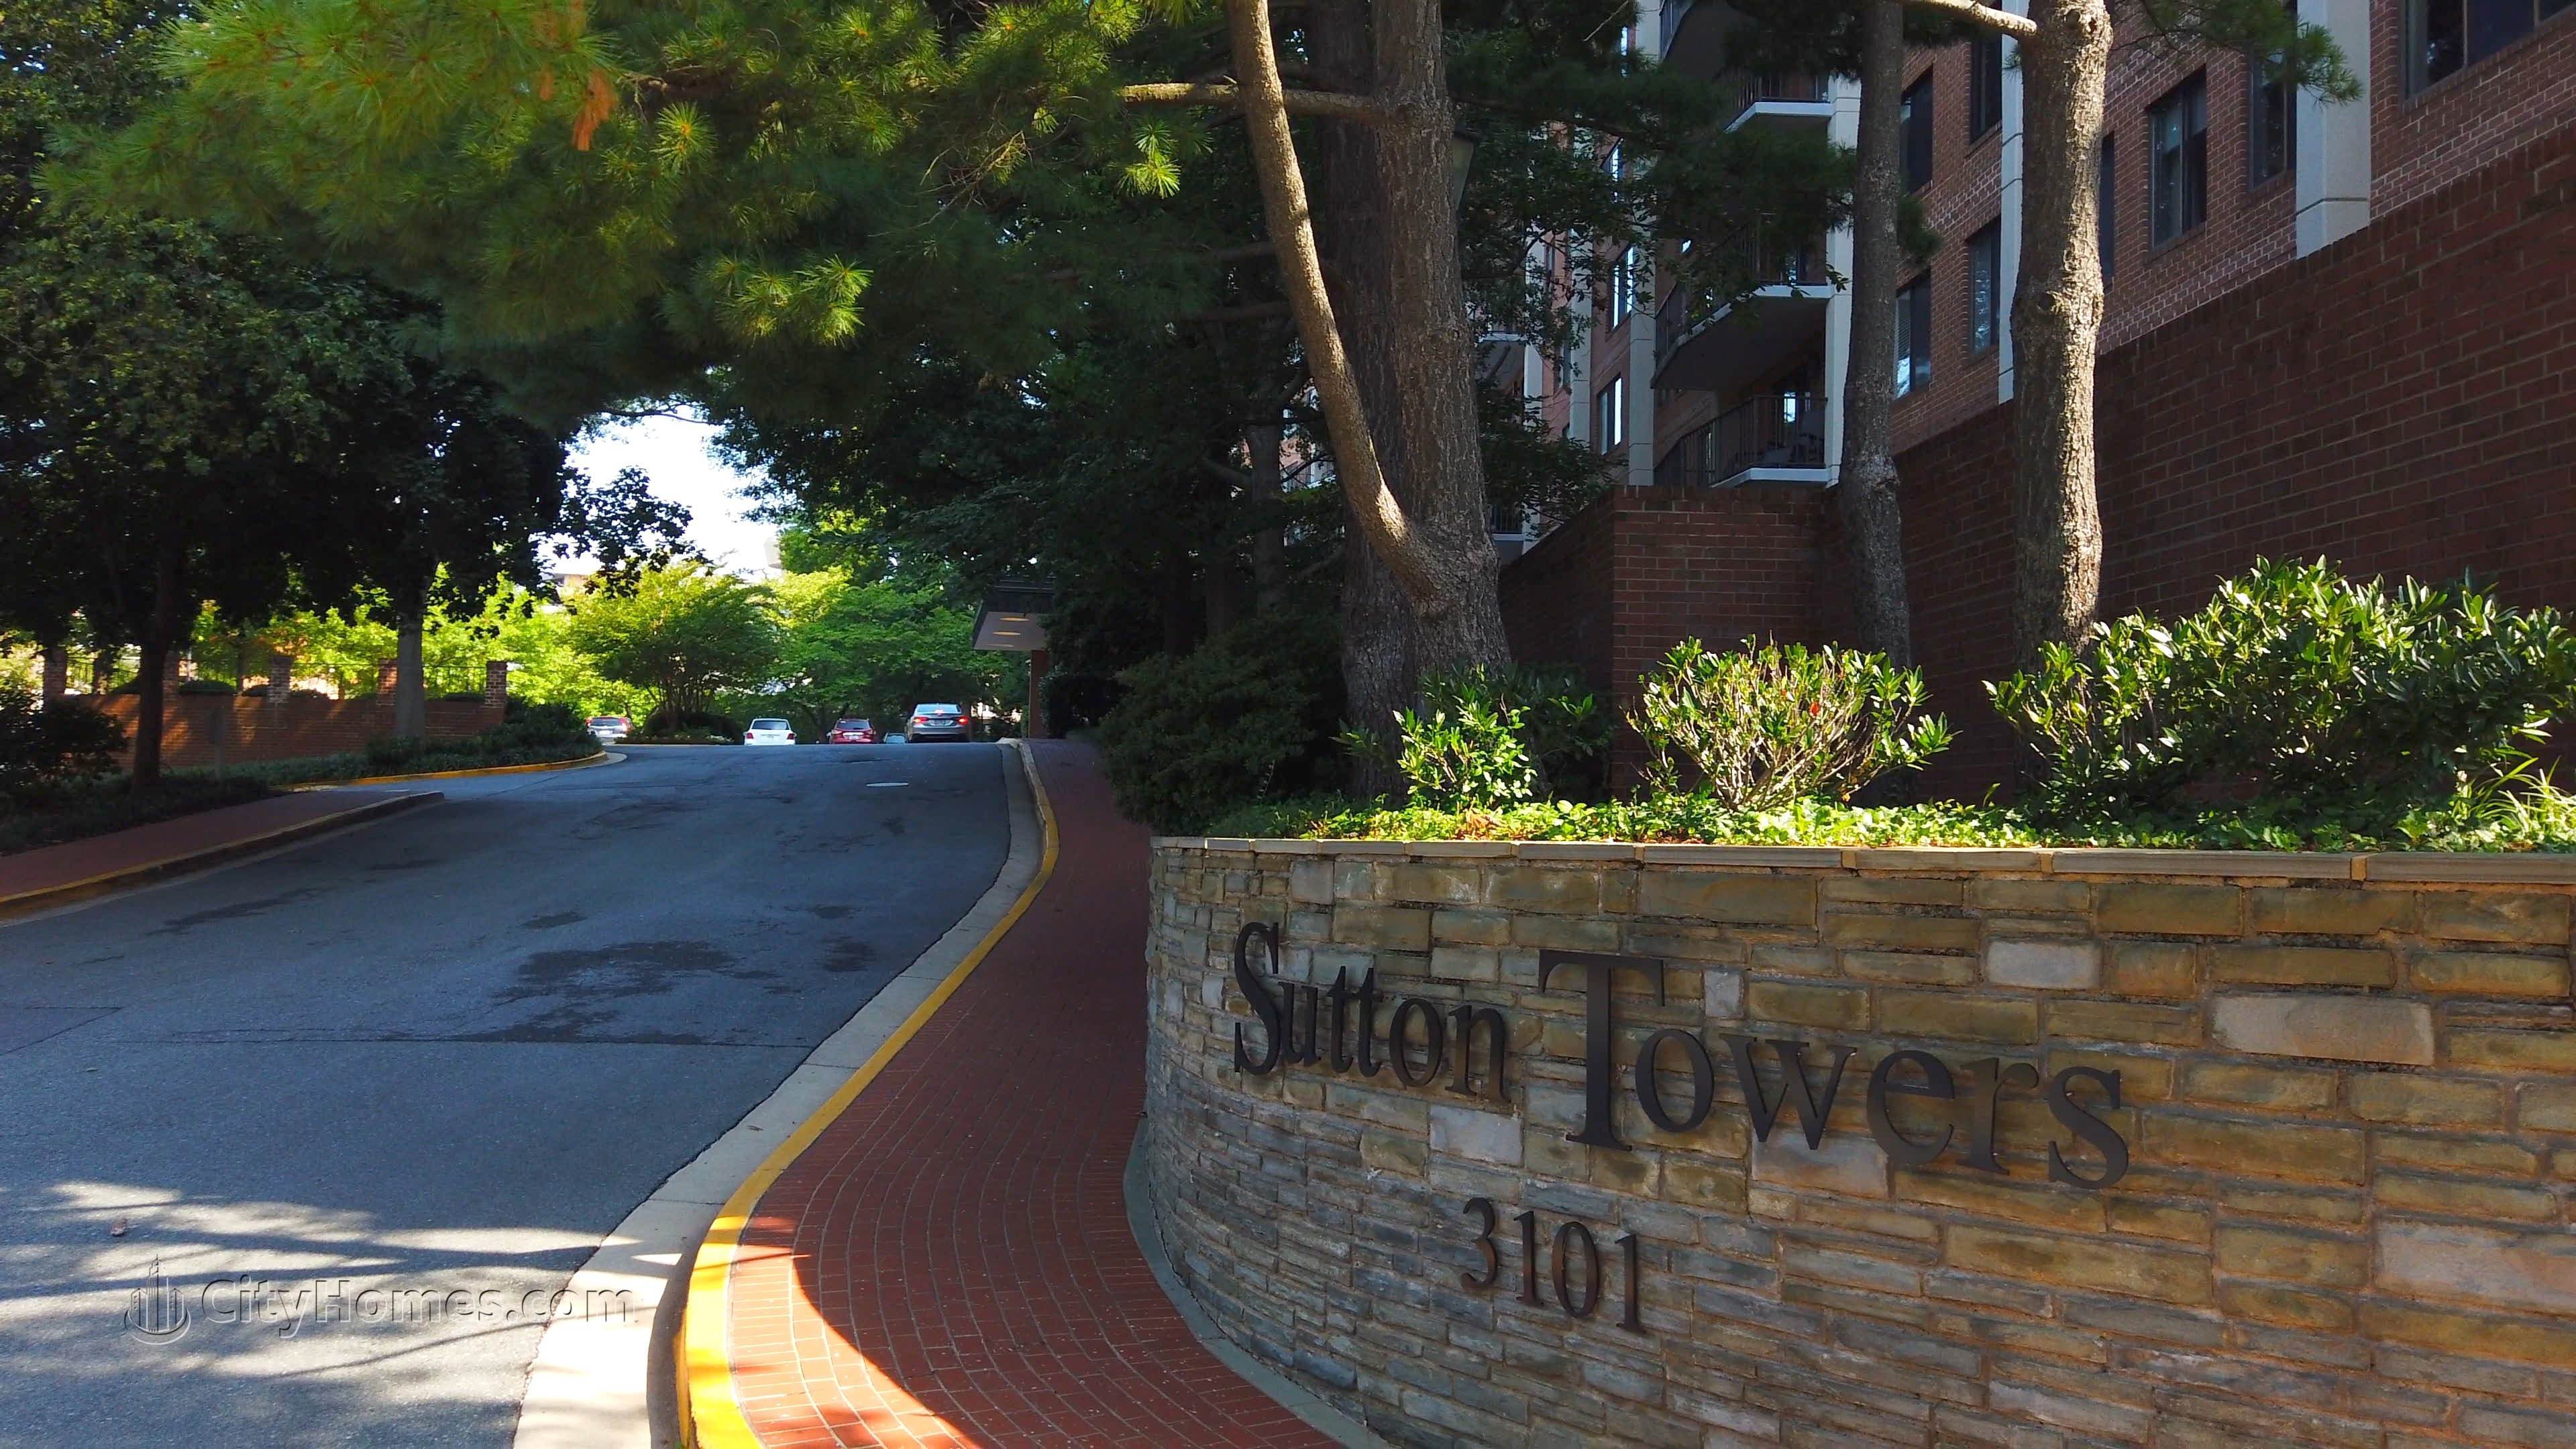 Sutton Towers xây dựng tại 3101 New Mexico Ave NW, Wesley Heights, Washington, DC 20016